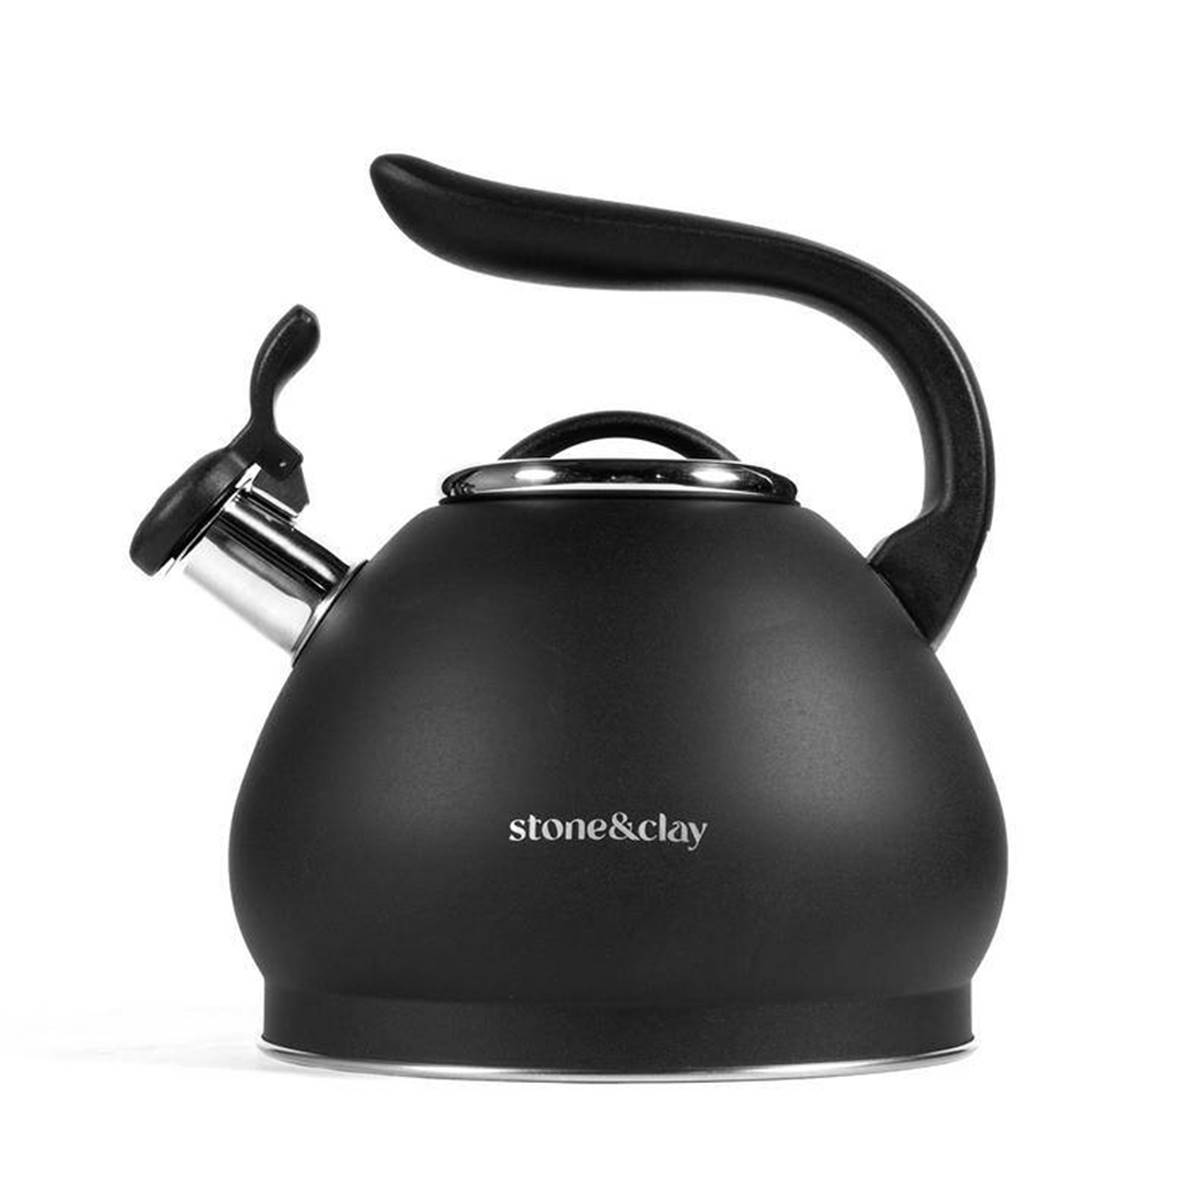 Stone & Clay Stainless Steel Whistling Tea Kettle